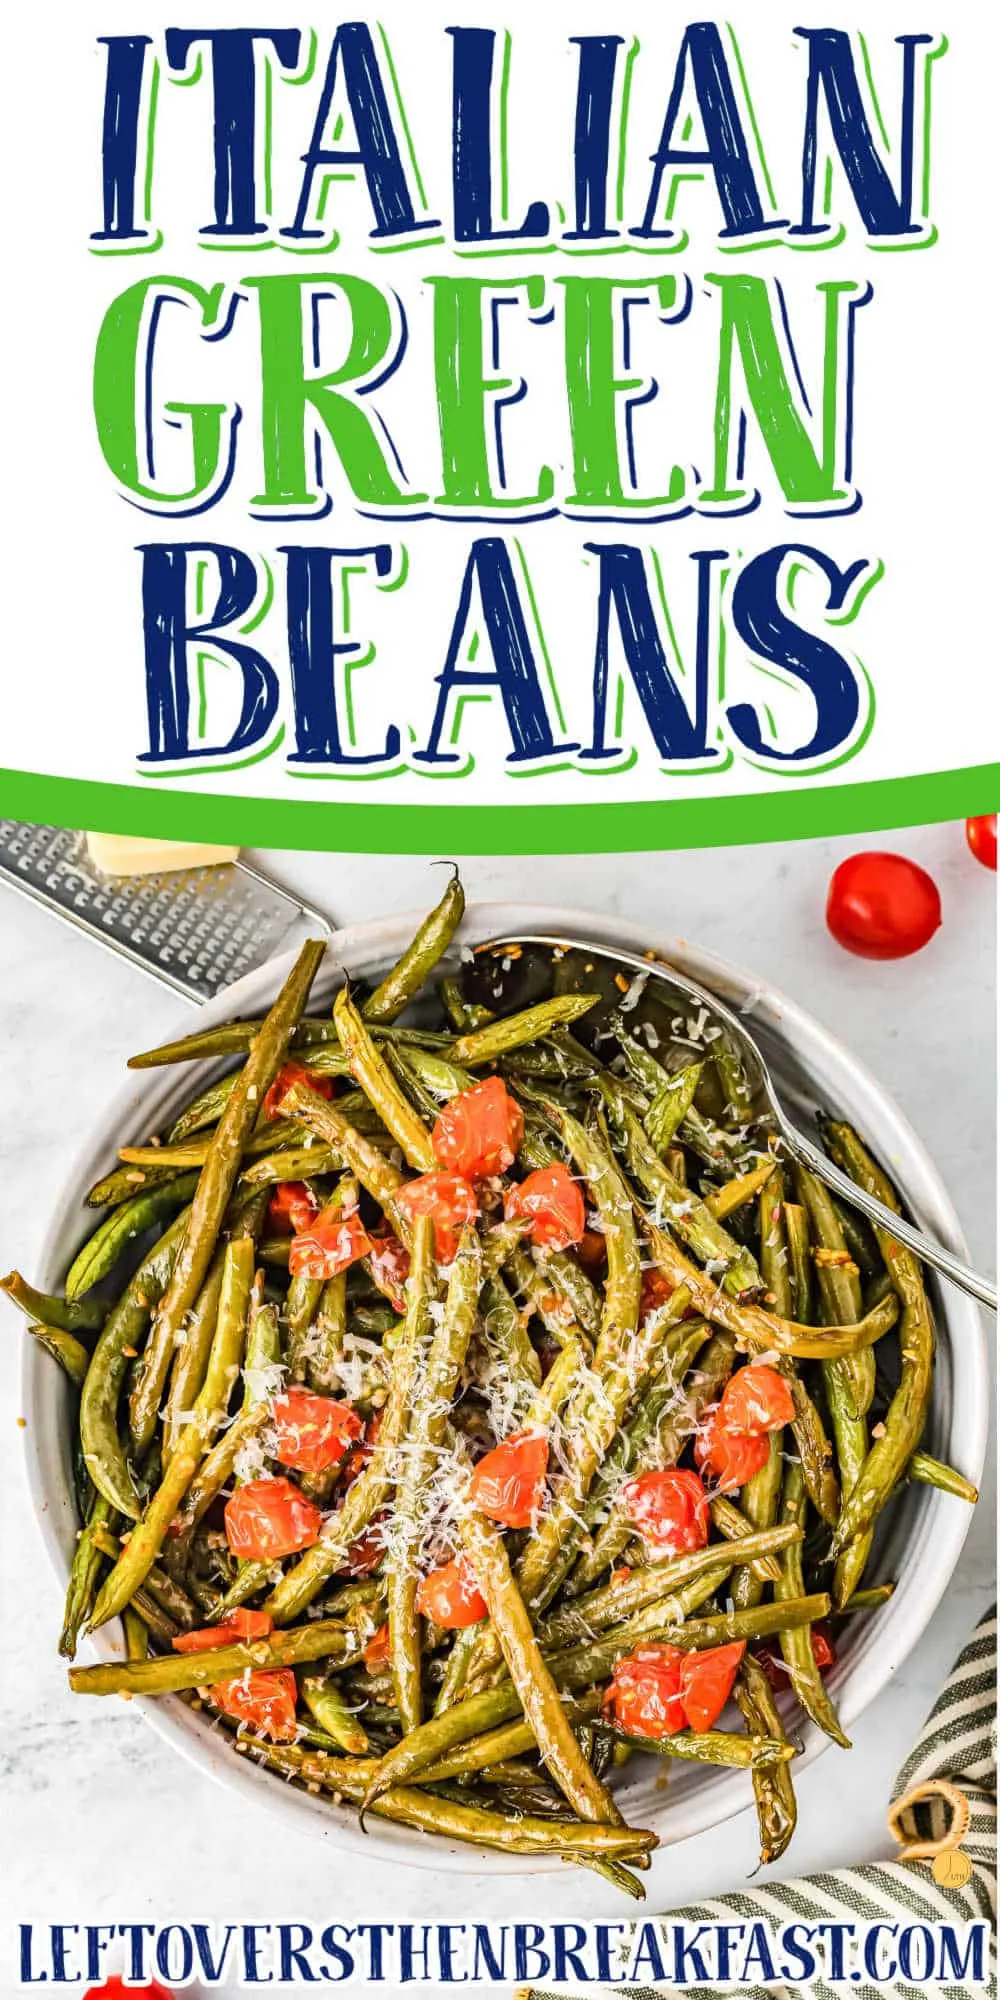 bowl of vegetables with text "italian green beans"